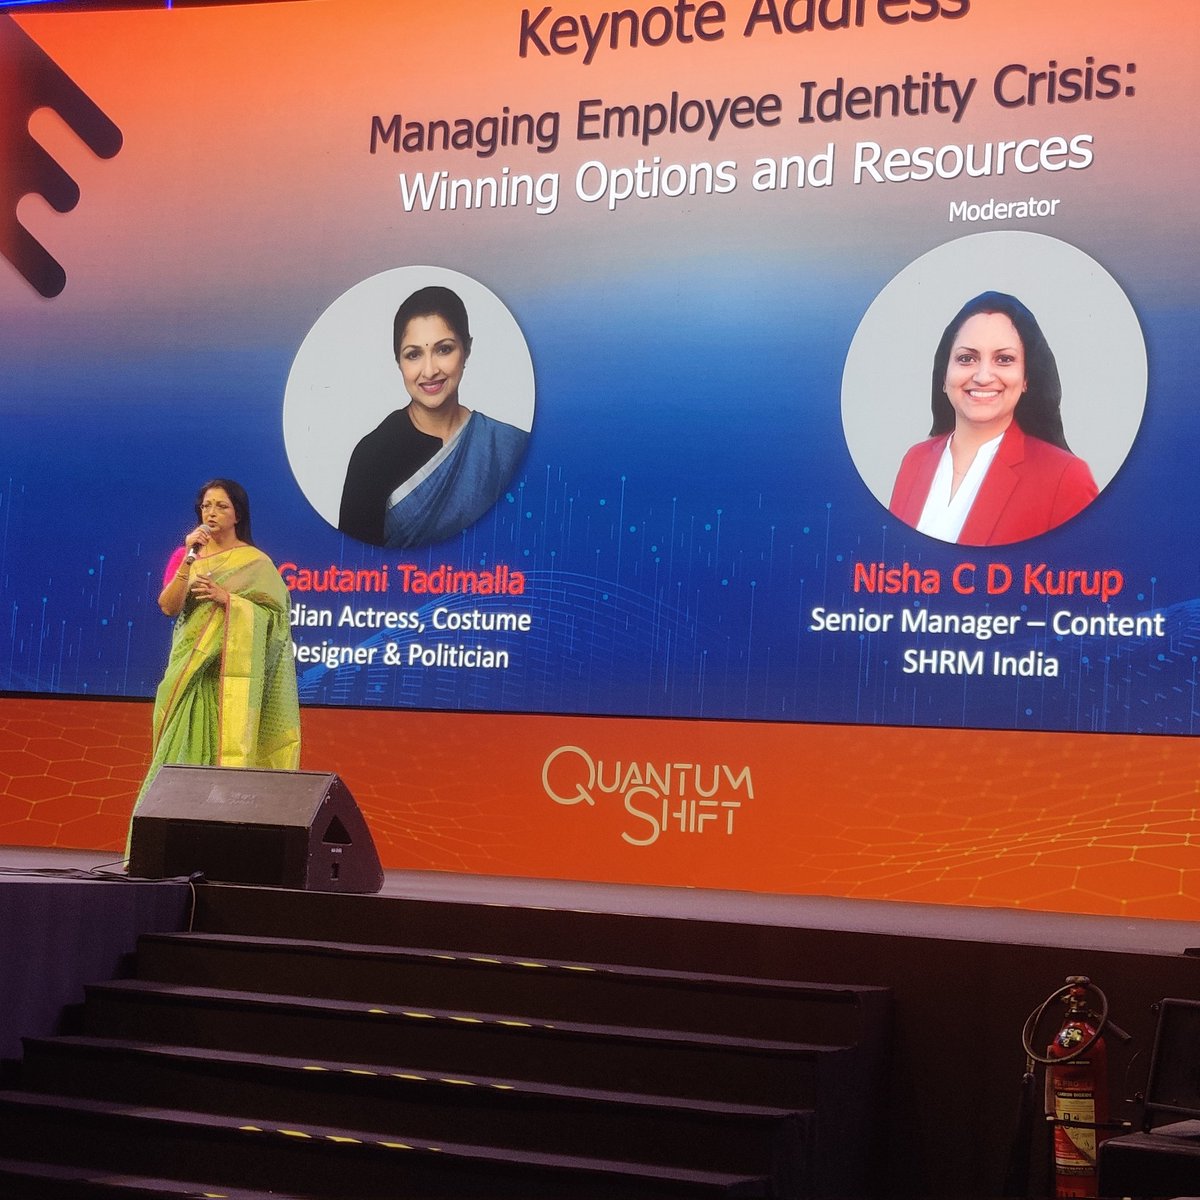 'Identity is the cornerstone but the bane of life! ' - @gautamitads alludes to the vulnerability&complexity of 3 personnas we need to simultaneously manage today more than ever -professional, personal& social. Need to be clear on 'who am I?' And anchor rightly. #SHRMTECH23